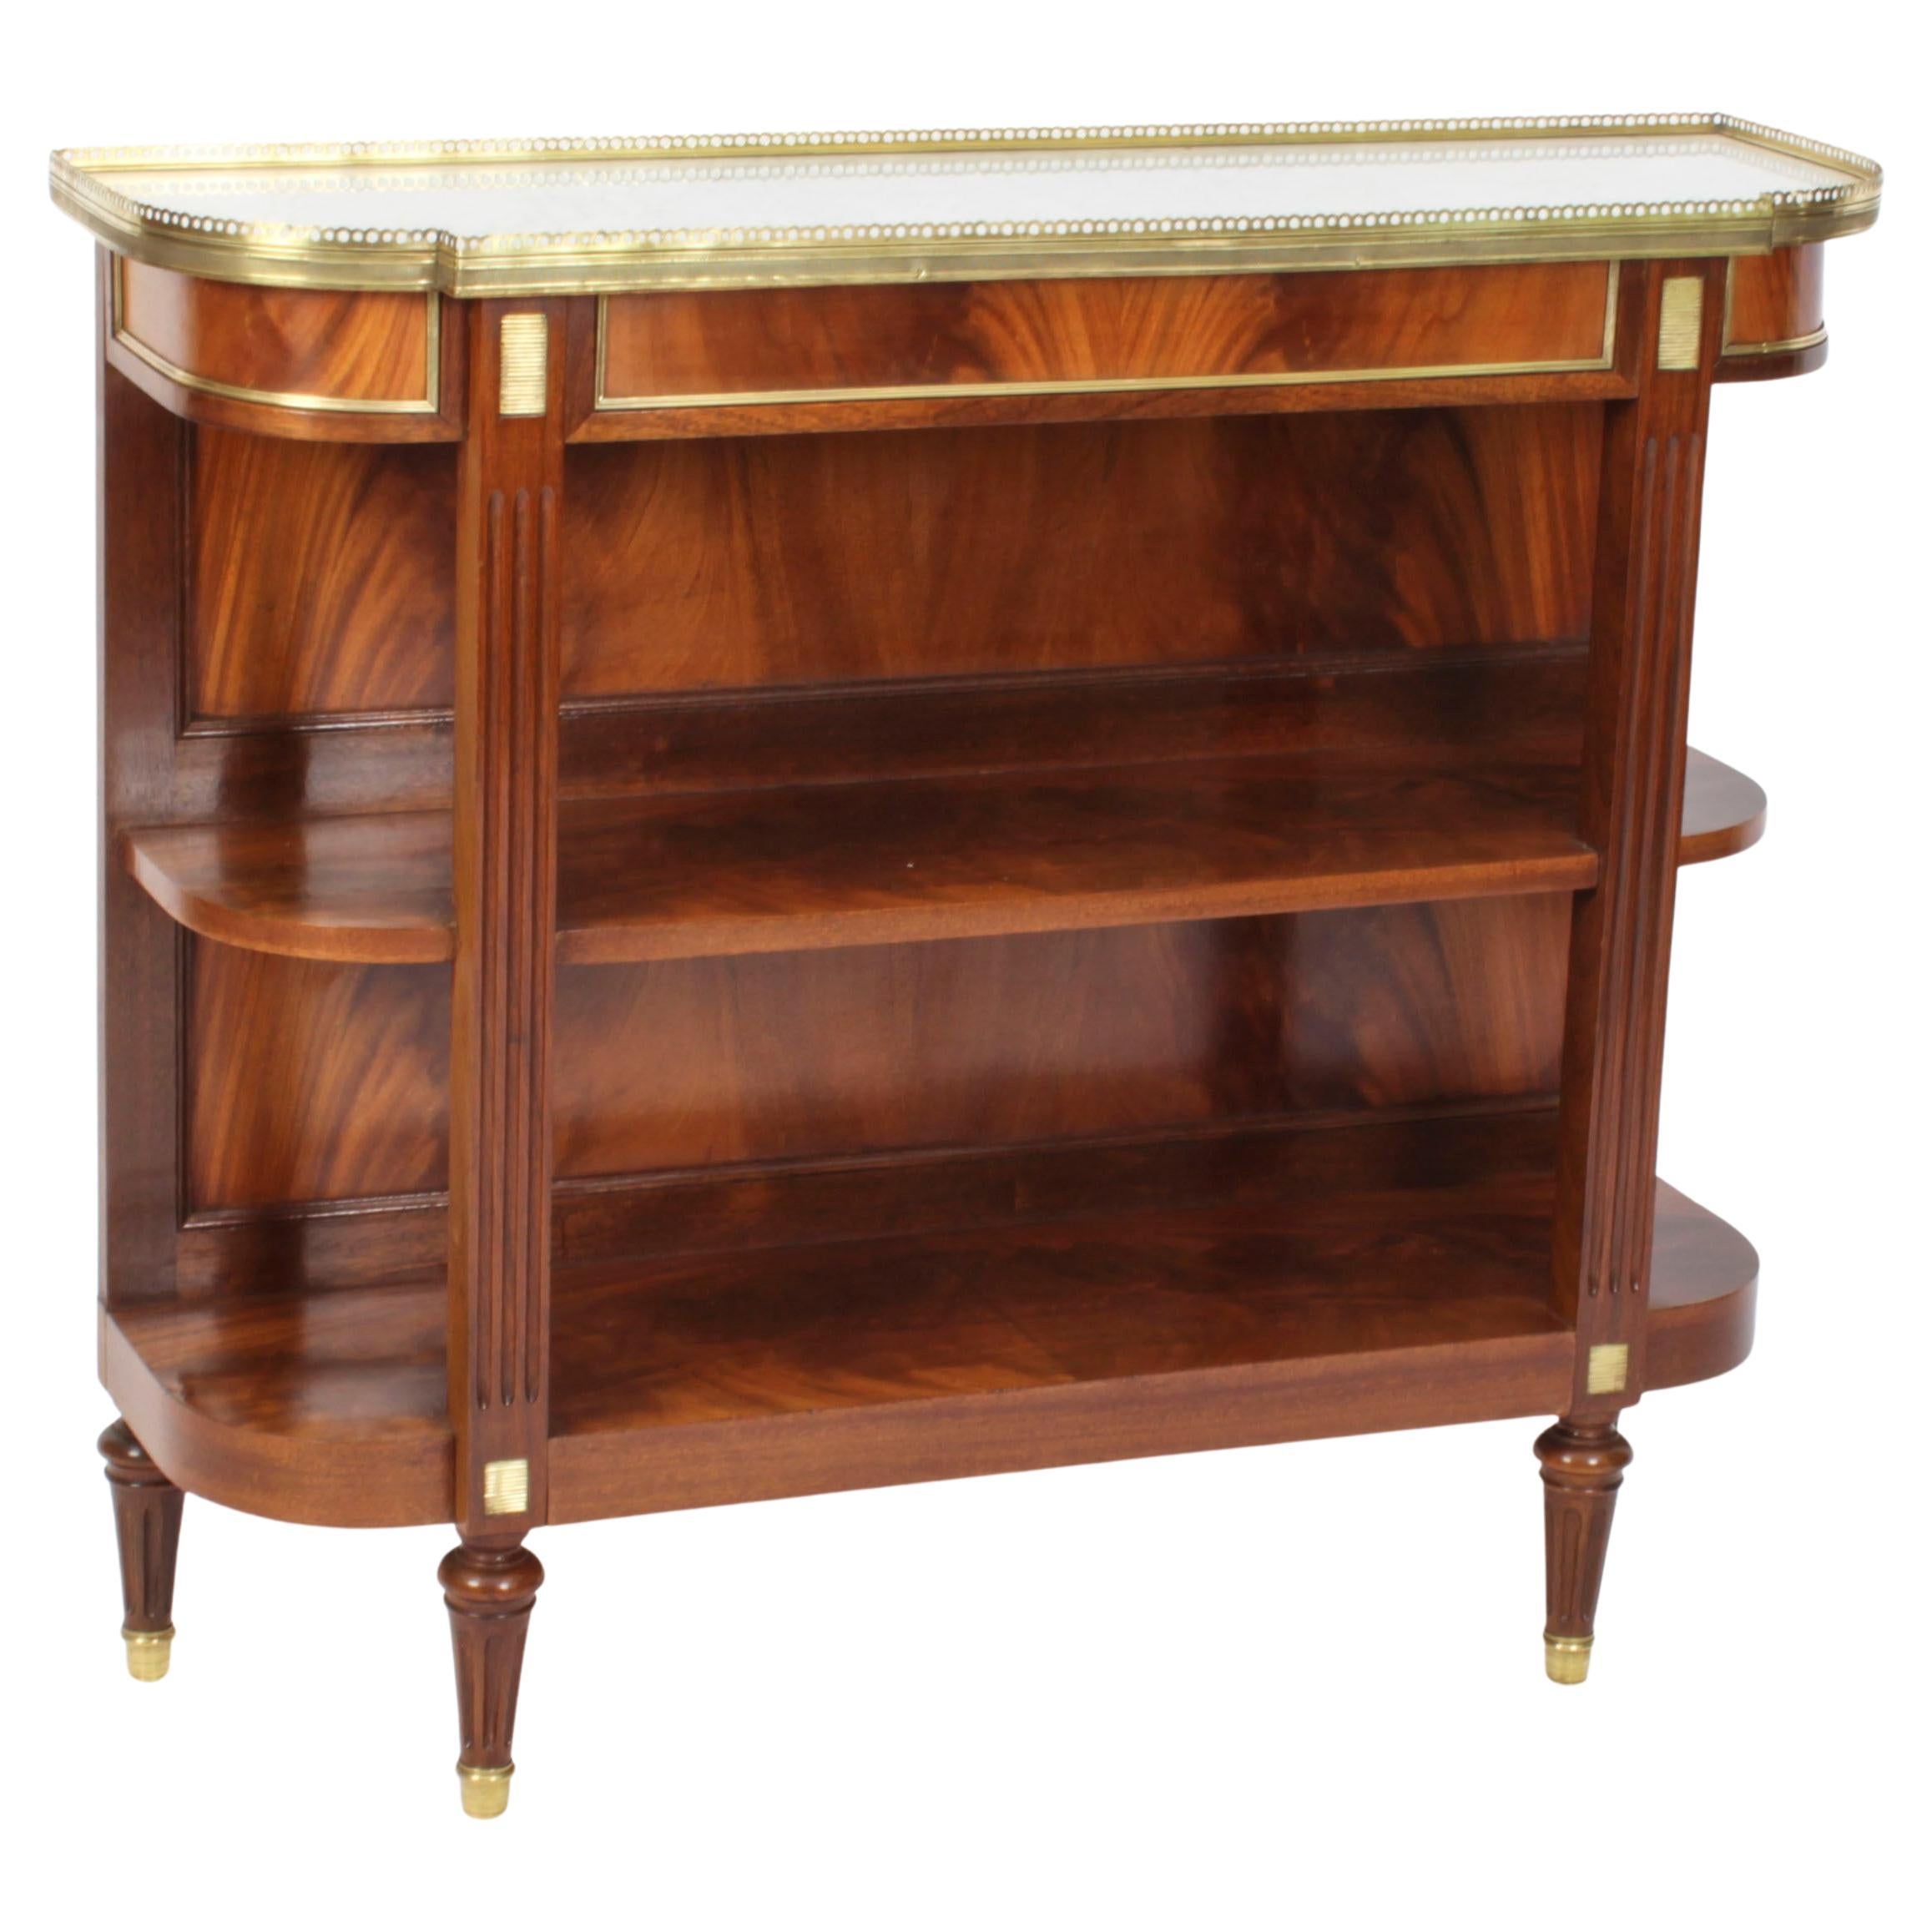 Antique French Directoire Buffet Sideboard Serving Table, 19th C For Sale